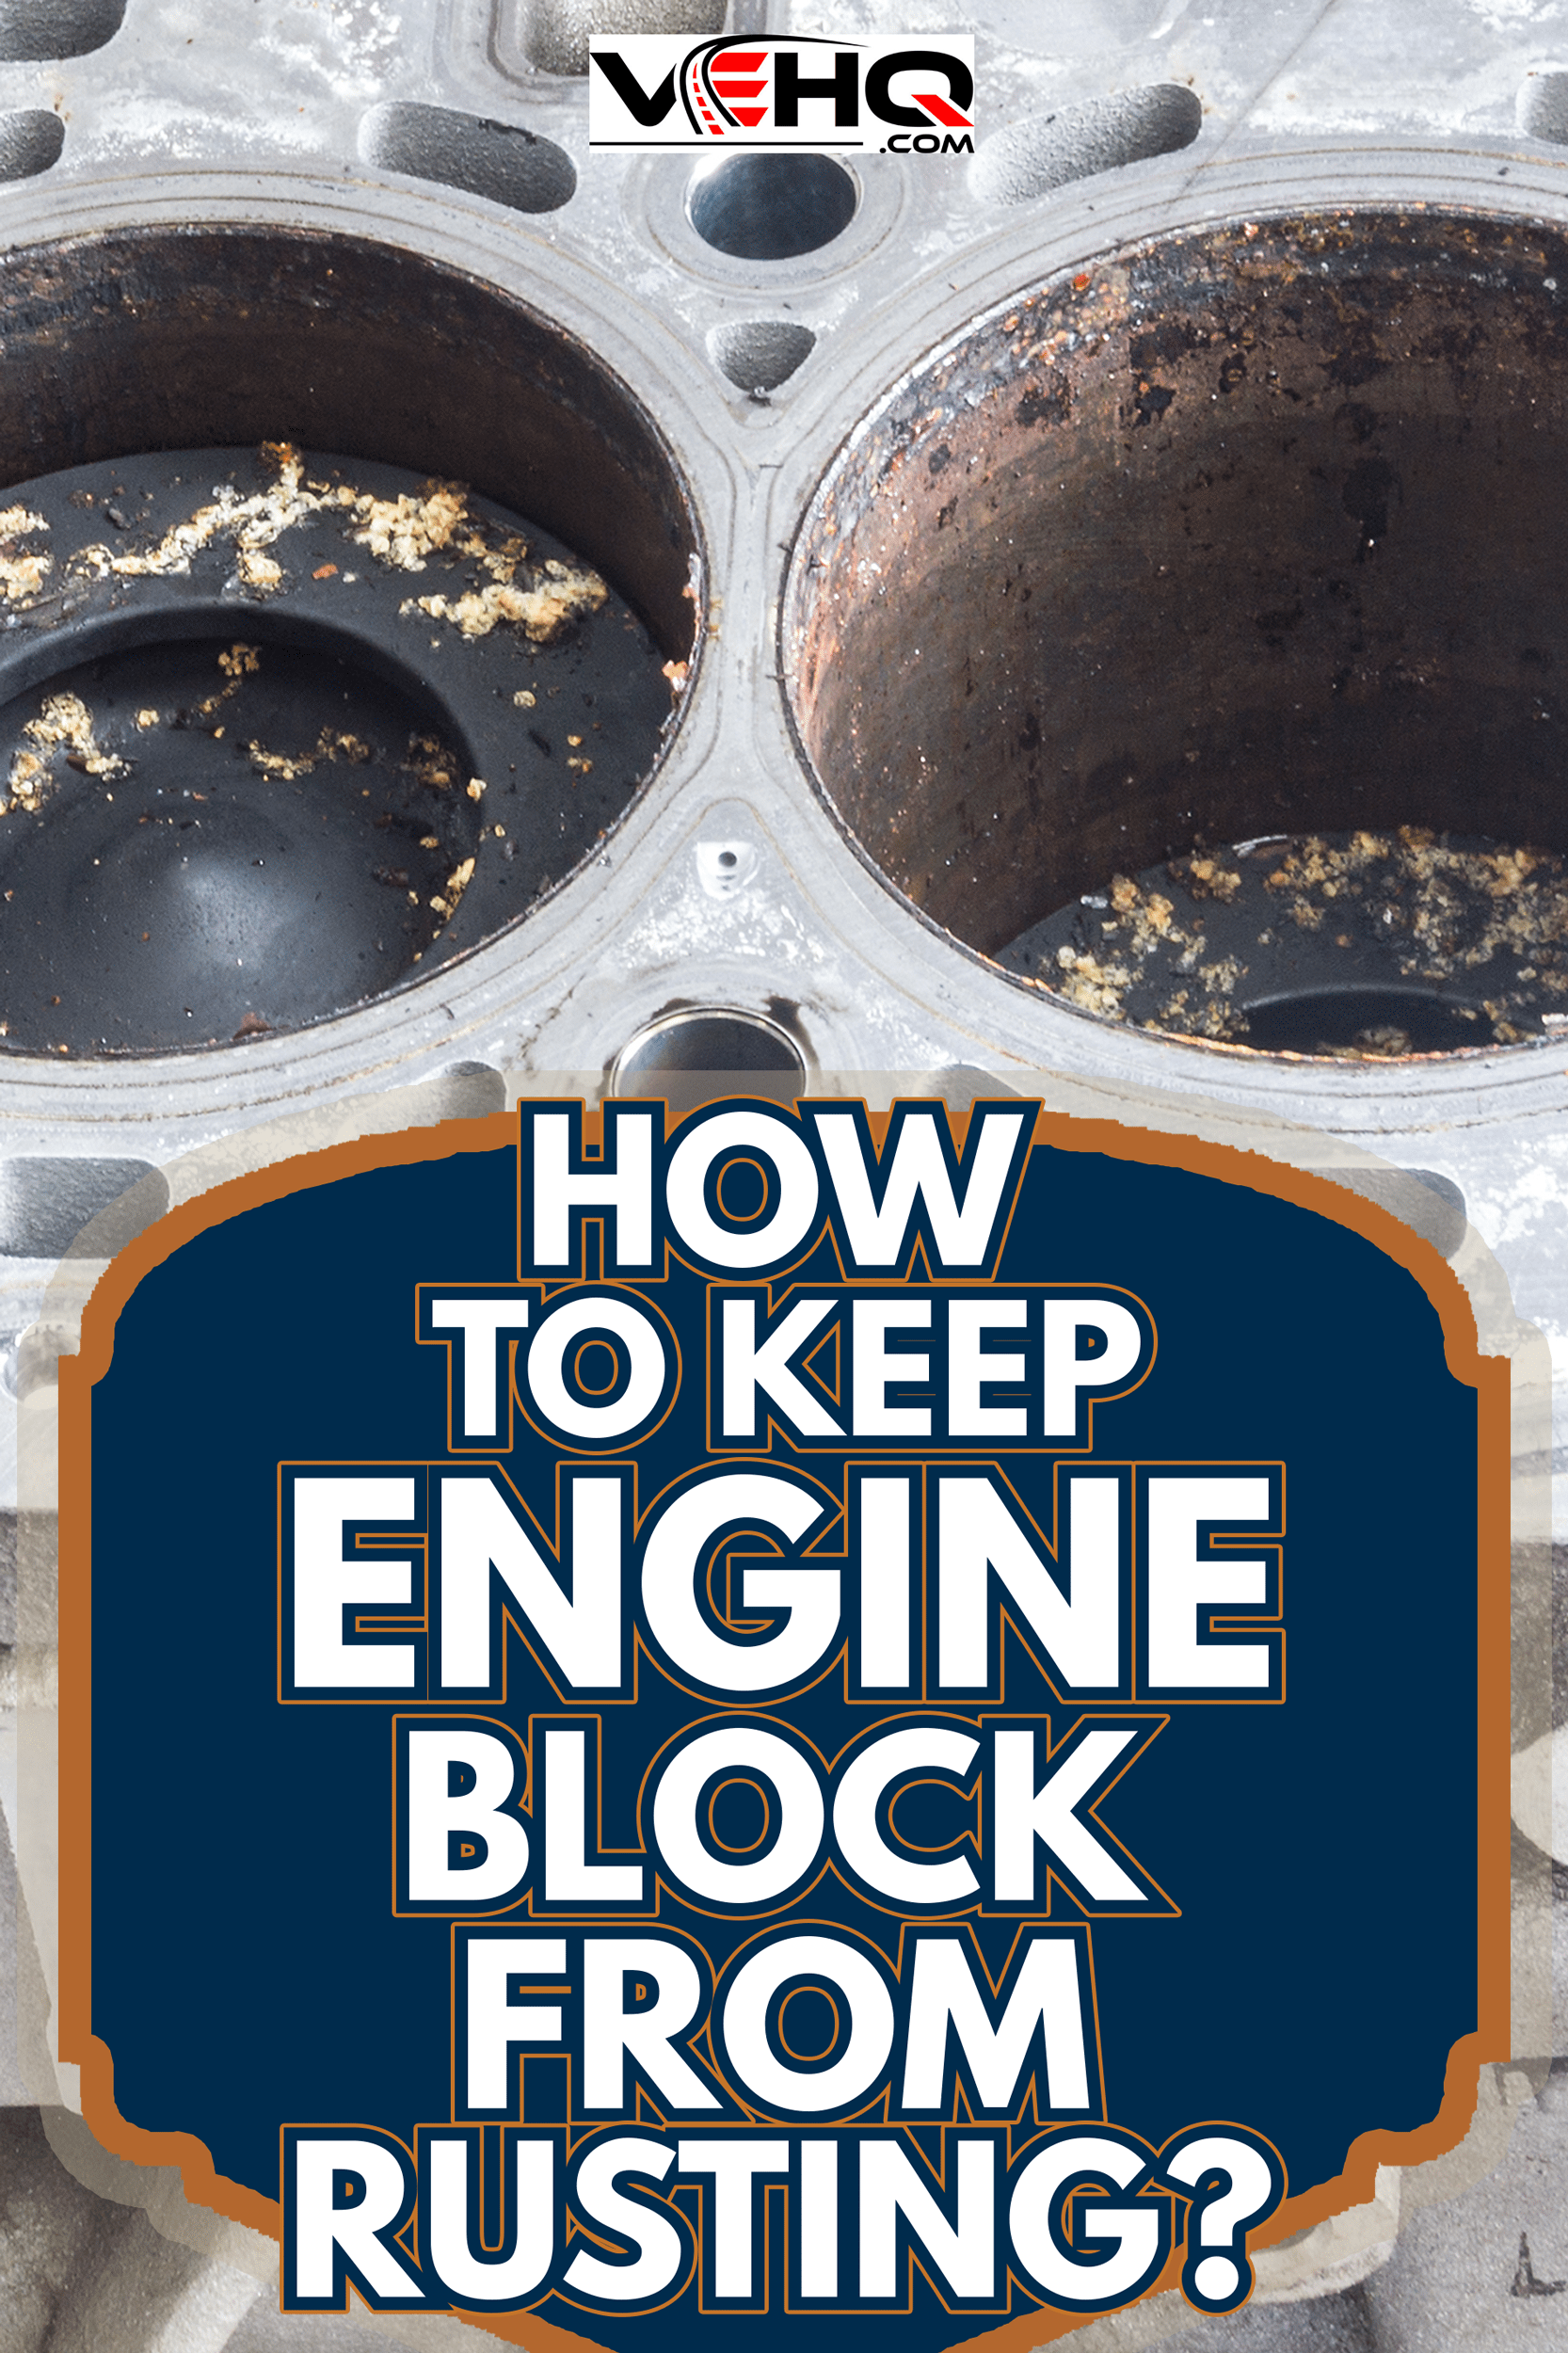 Engine block and piston with rust , Automotive engine damage occurs when water enters the engine and is compressed - How To Keep Engine Block From Rusting